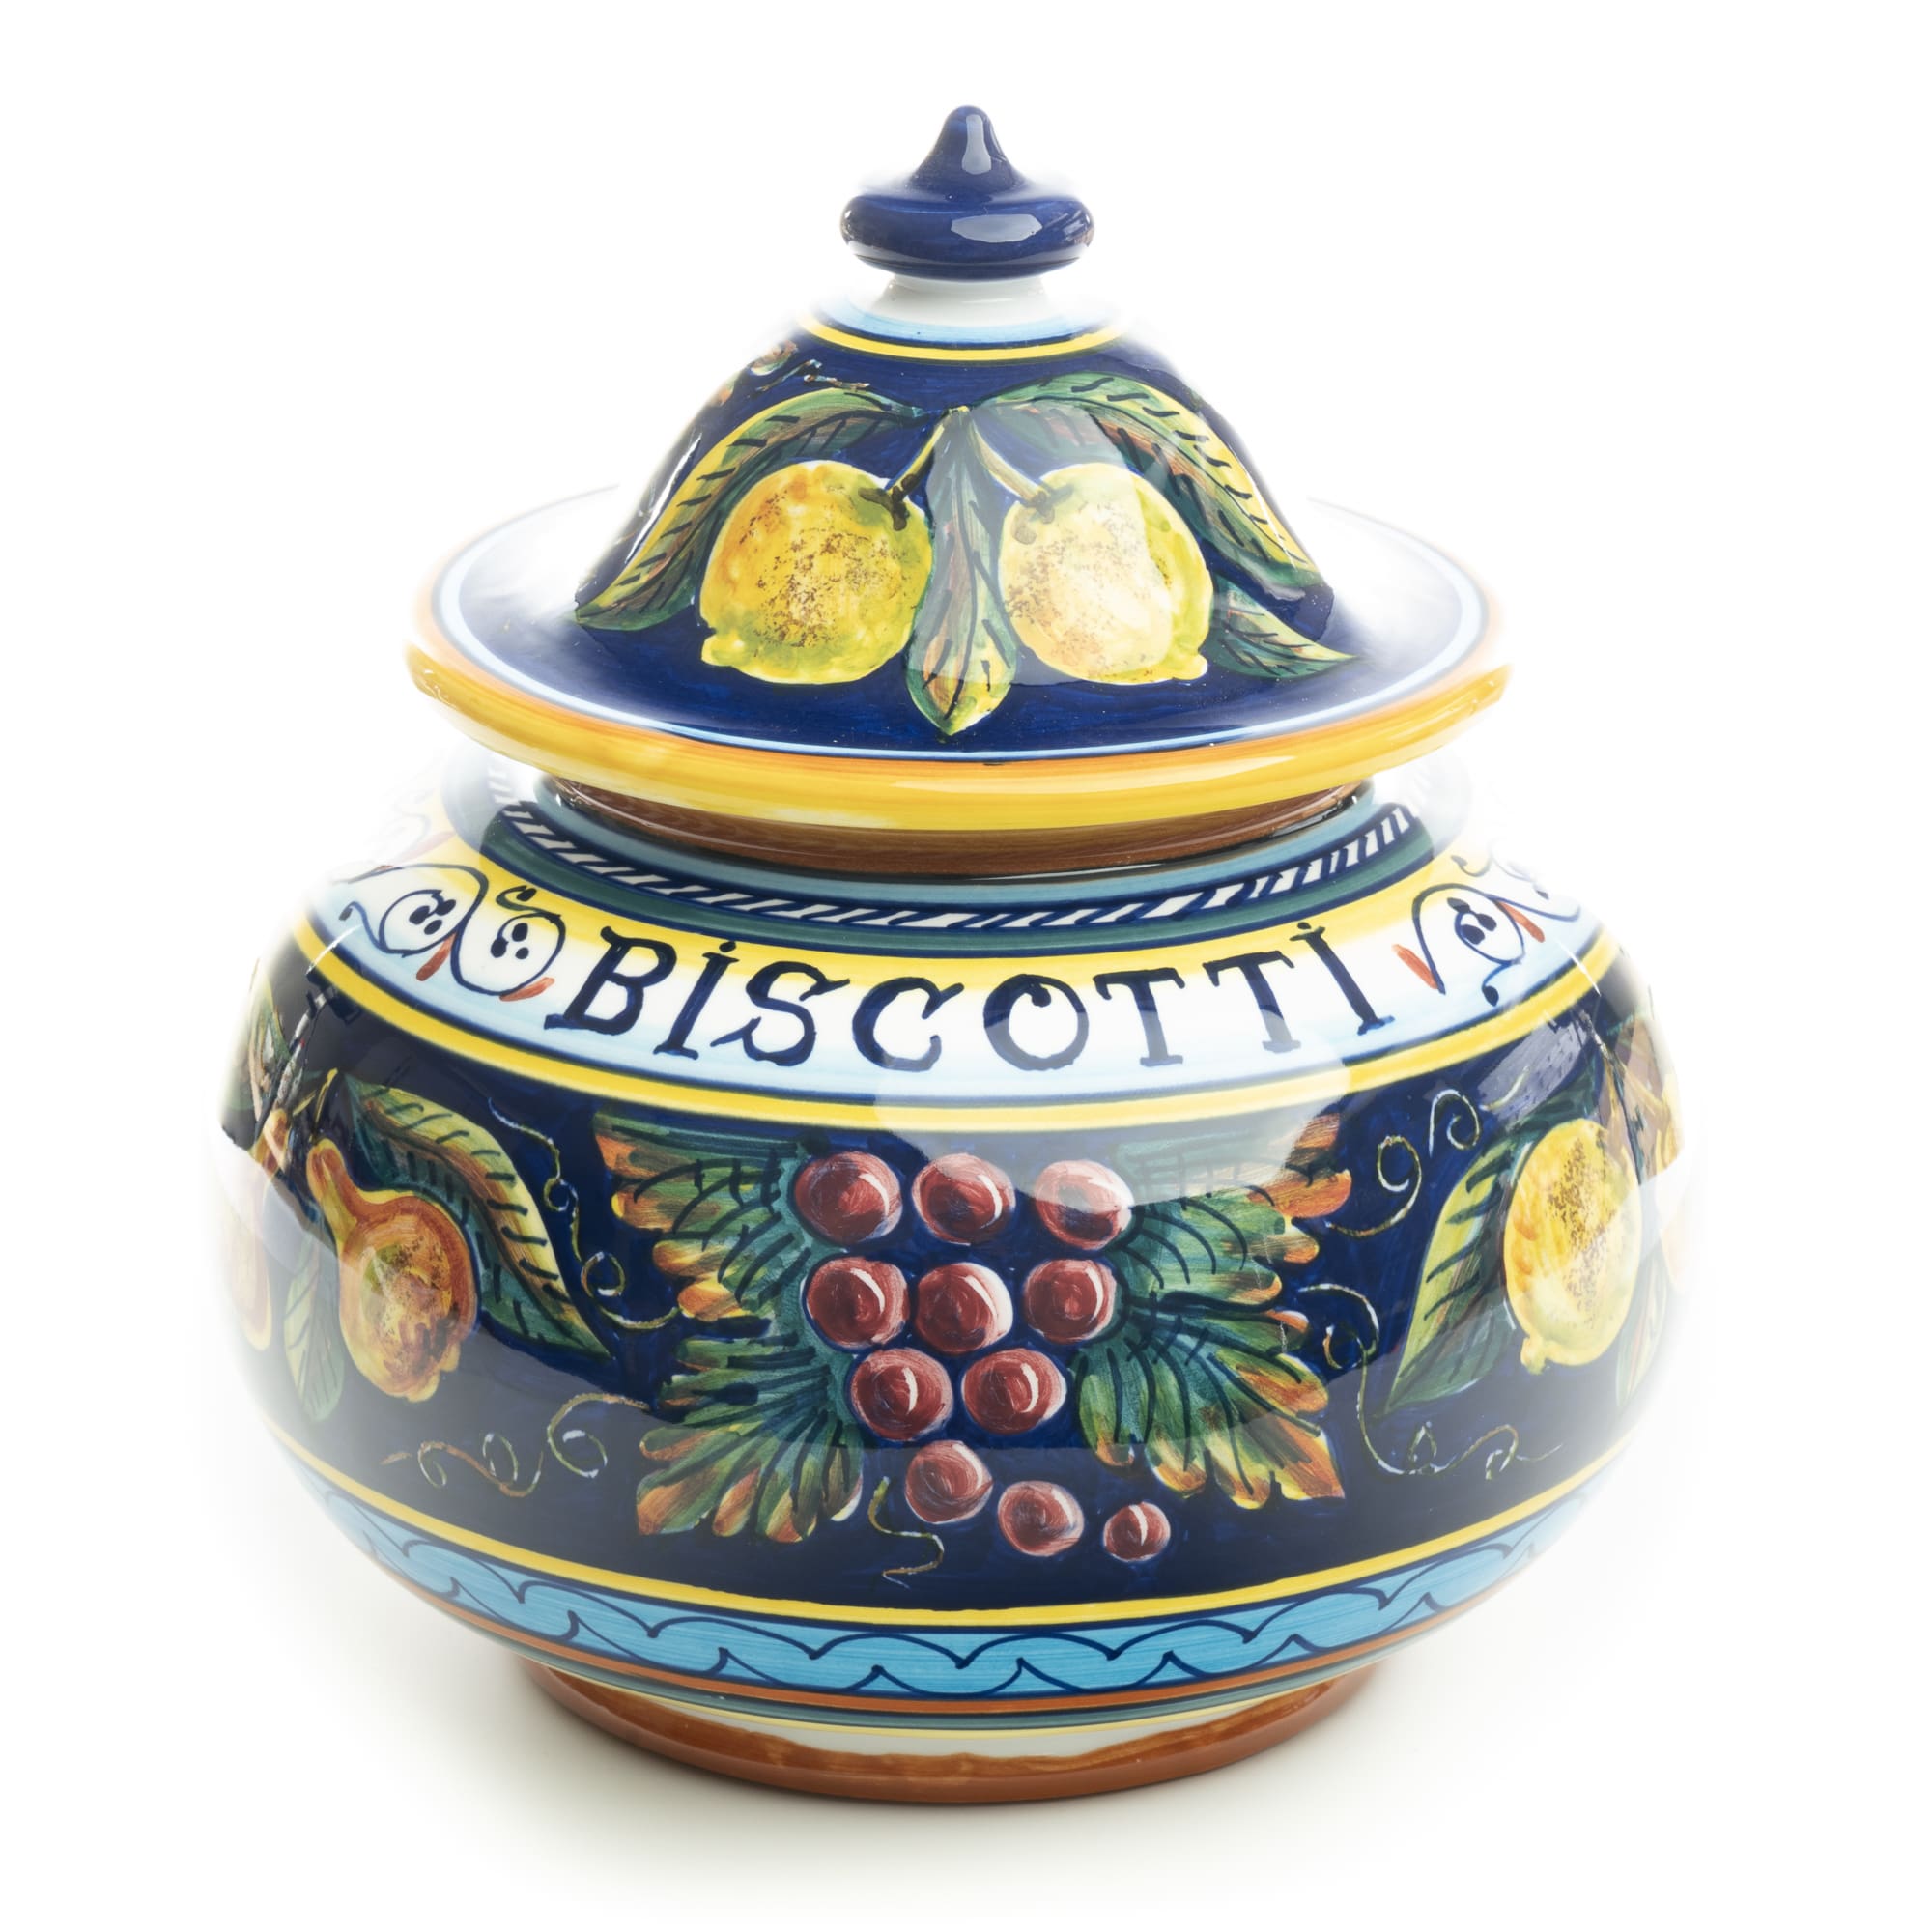 Collectible Majolica Round Biscotti Jar B-57, ceramics, pottery, italian design, majolica, handmade, handcrafted, handpainted, home decor, kitchen art, home goods, deruta, majolica, Artisan, treasures, traditional art, modern art, gift ideas, style, SF, shop small business, artists, shop online, landmark store, legacy, one of a kind, limited edition, gift guide, gift shop, retail shop, decorations, shopping, italy, home staging, home decorating, home interiors